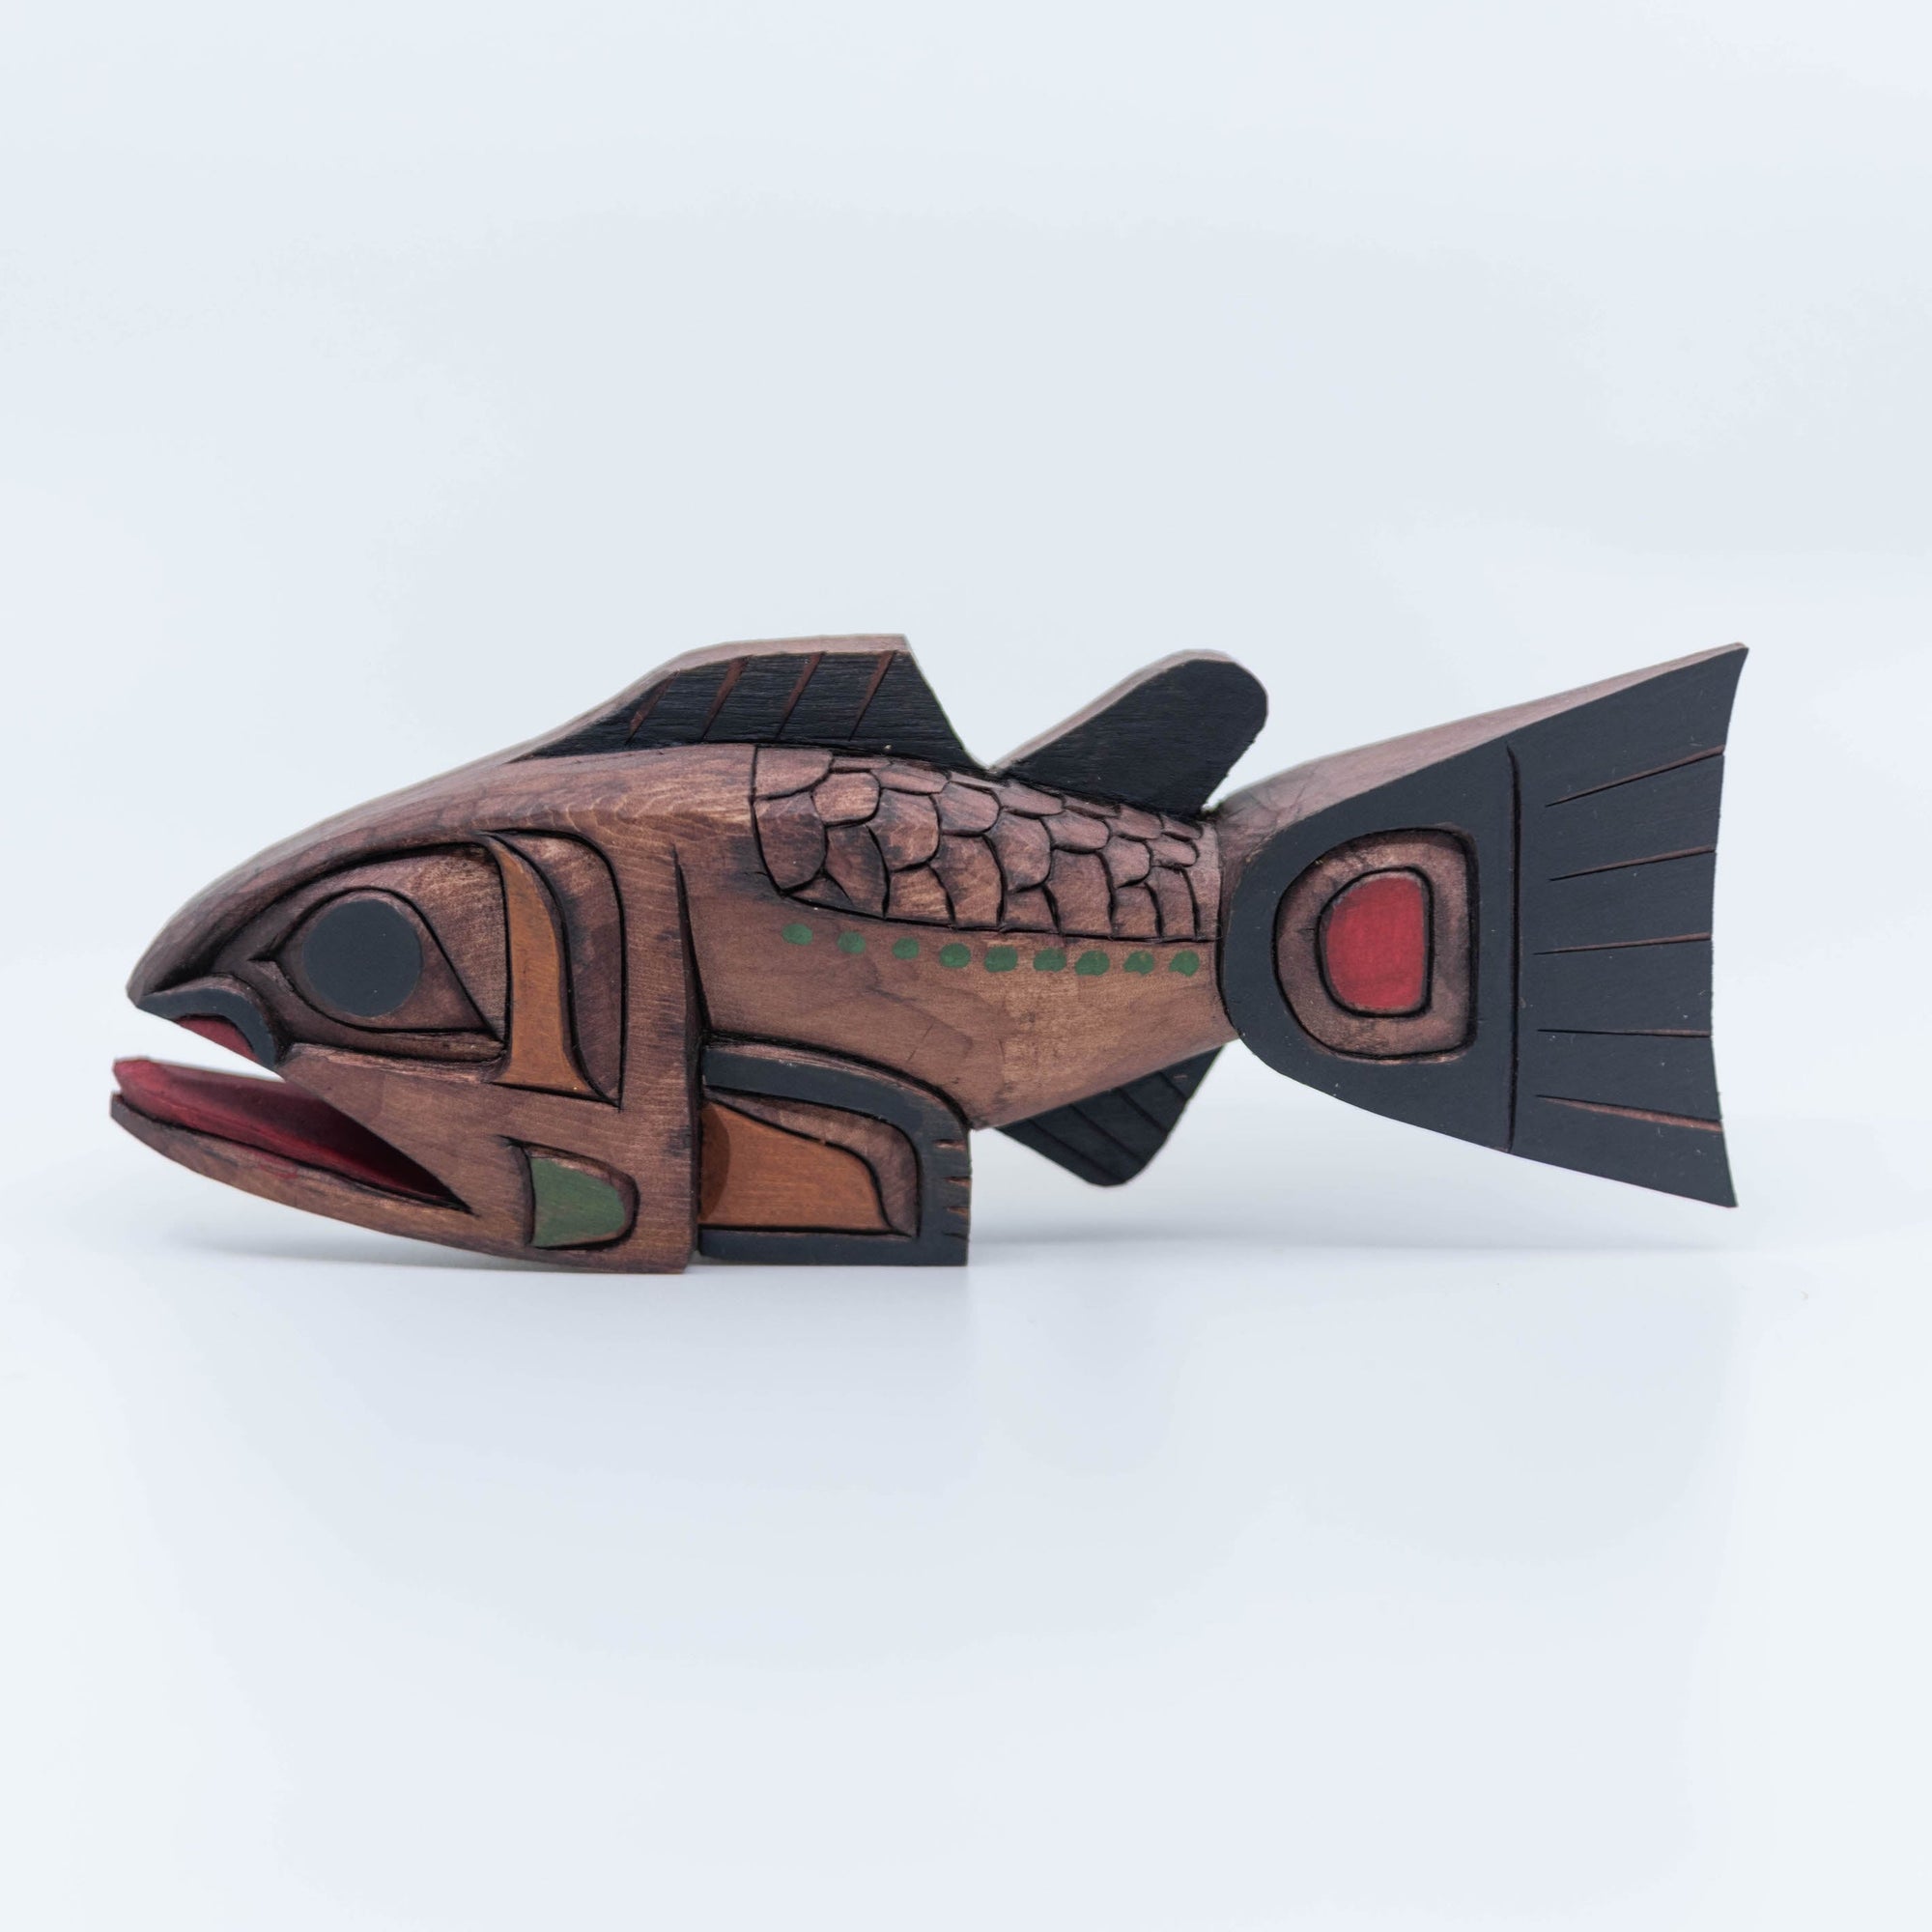 Robert Rufus Salmon Mini - Robert Rufus Salmon Mini -  - House of Himwitsa Native Art Gallery and Gifts